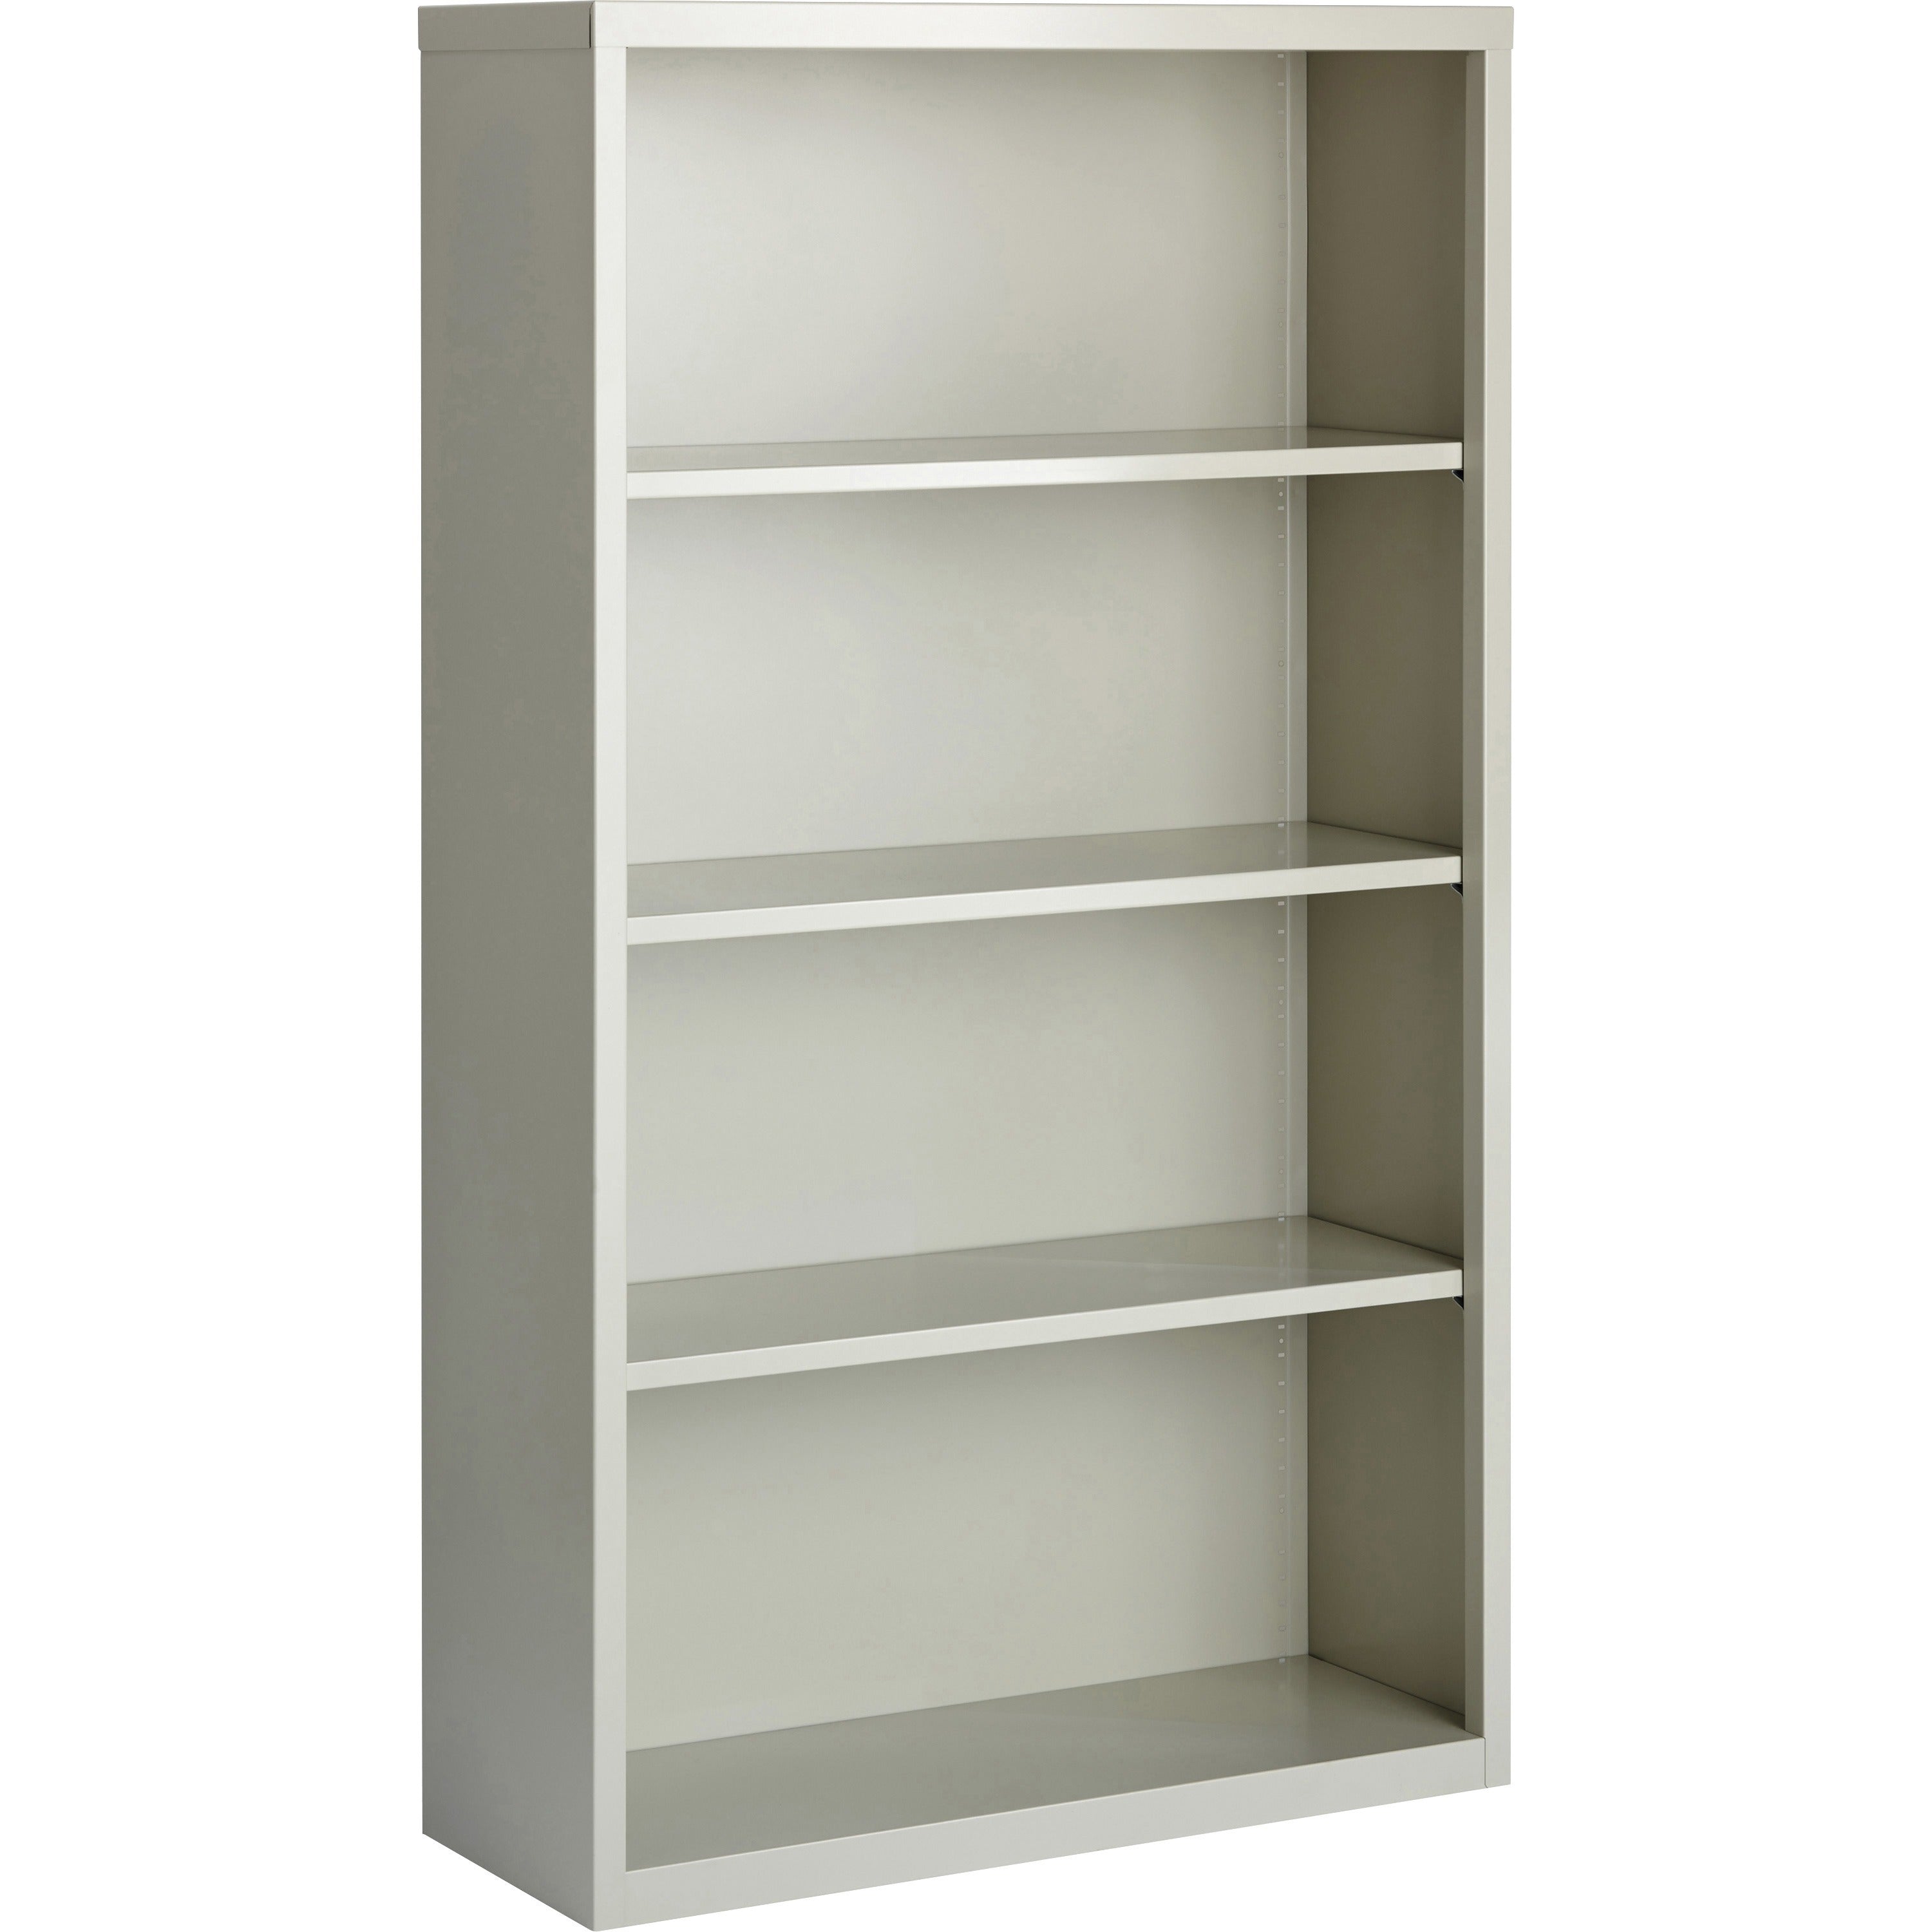 Lorell Fortress Series Bookcase - 34.5" x 13" x 60" - 4 x Shelf(ves) - Light Gray - Powder Coated - Steel - Recycled - 